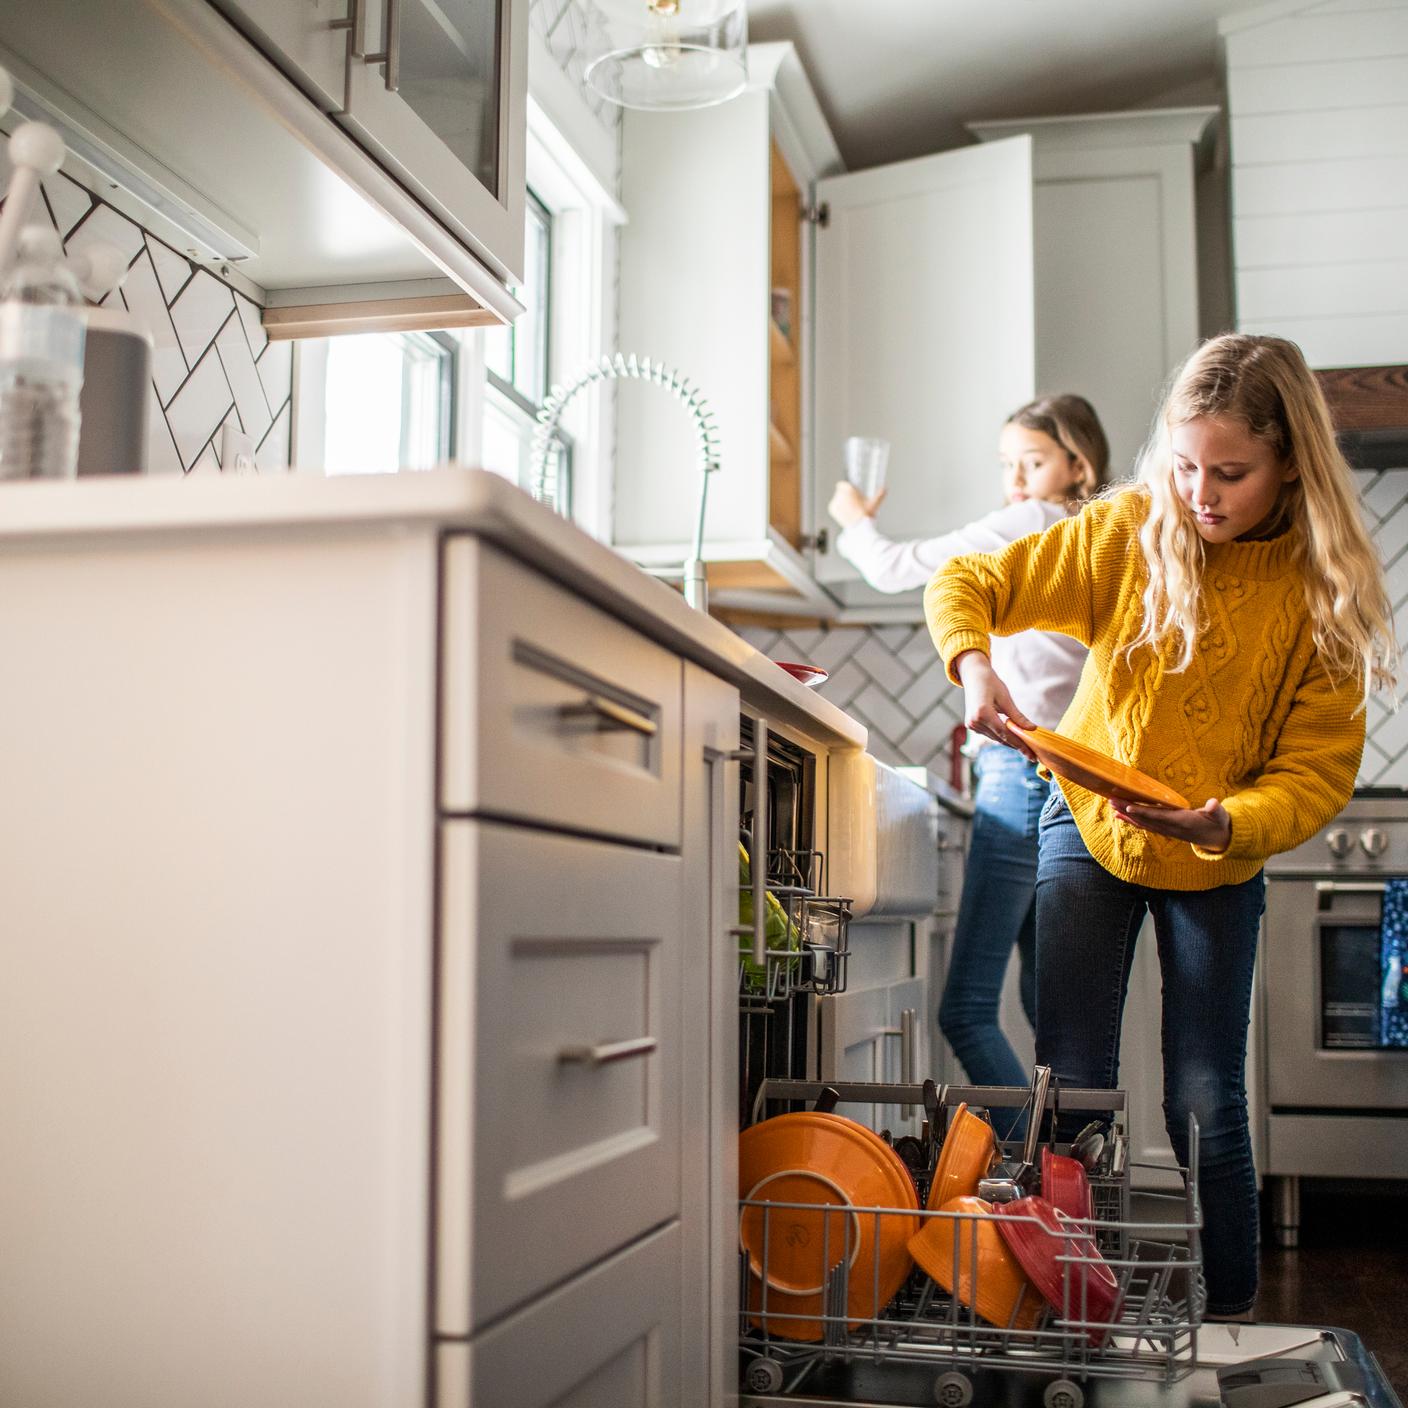 Supporting move to low energy system -  Tween girls doing dishes in kitchen